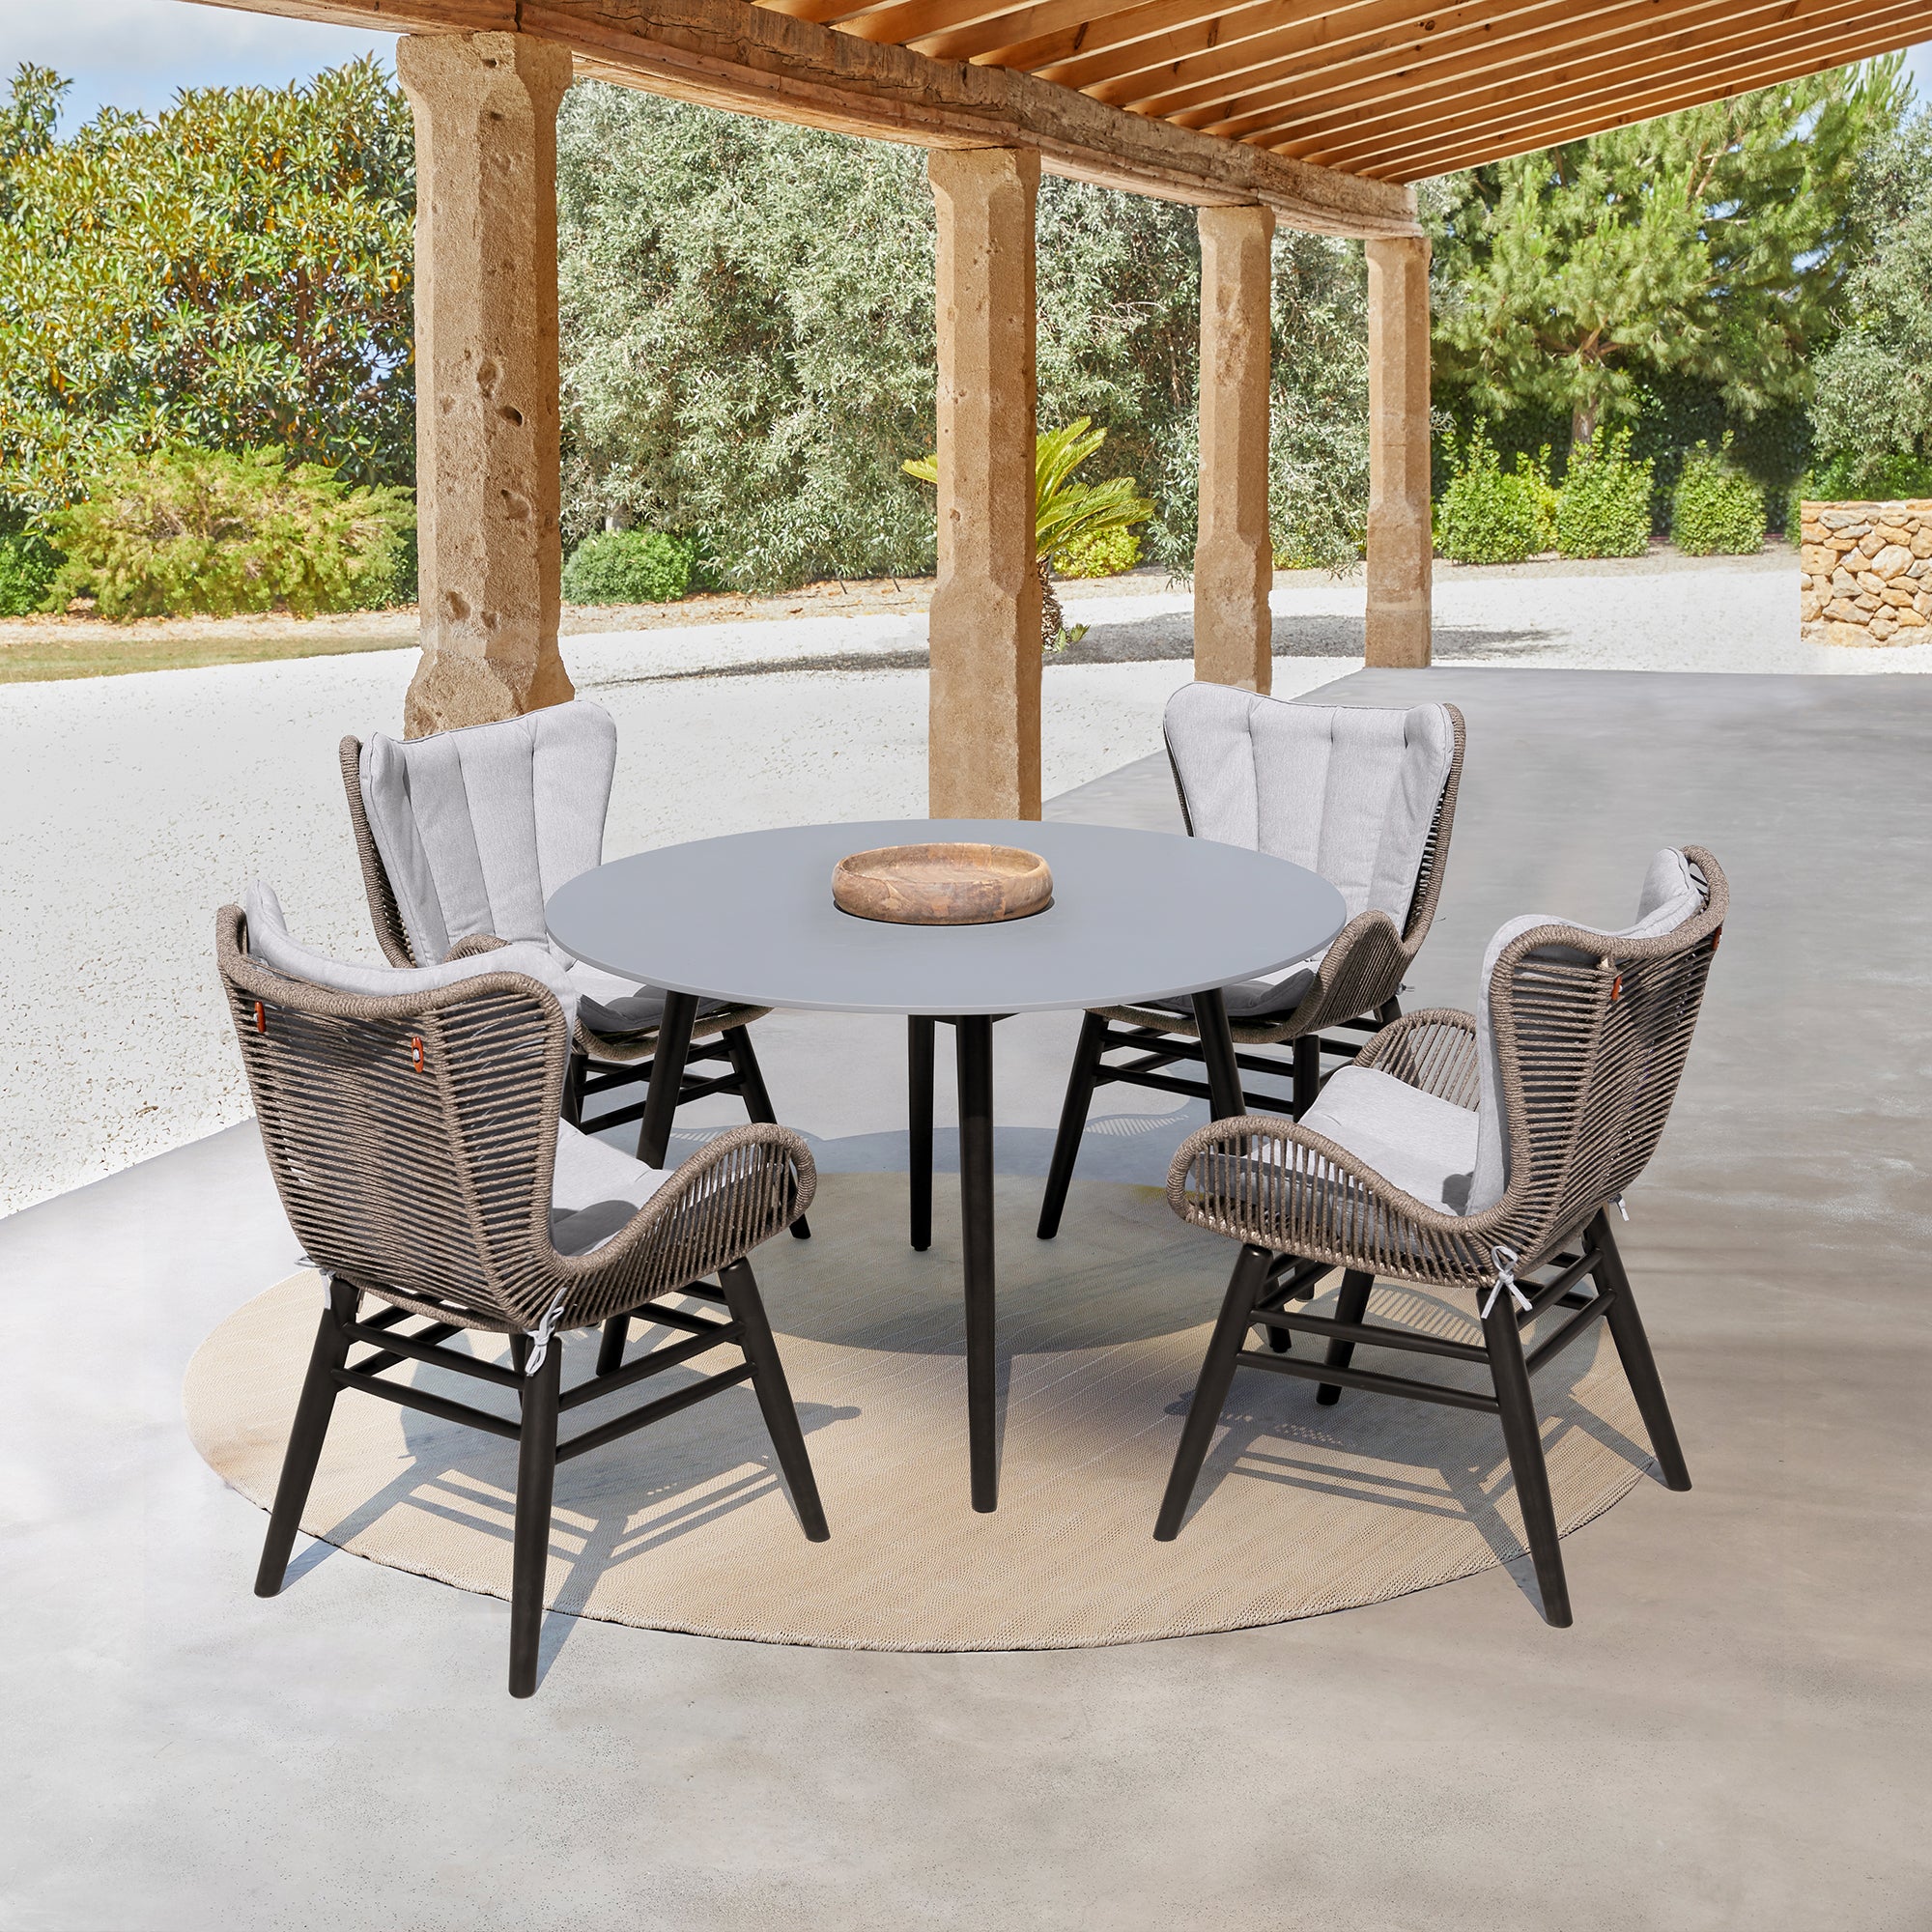 Armen Living - Sydney and Fanny 5 Piece Outdoor Patio Dining Set in Eucalyptus Wood with Rope and Grey Cushions - 840254335950